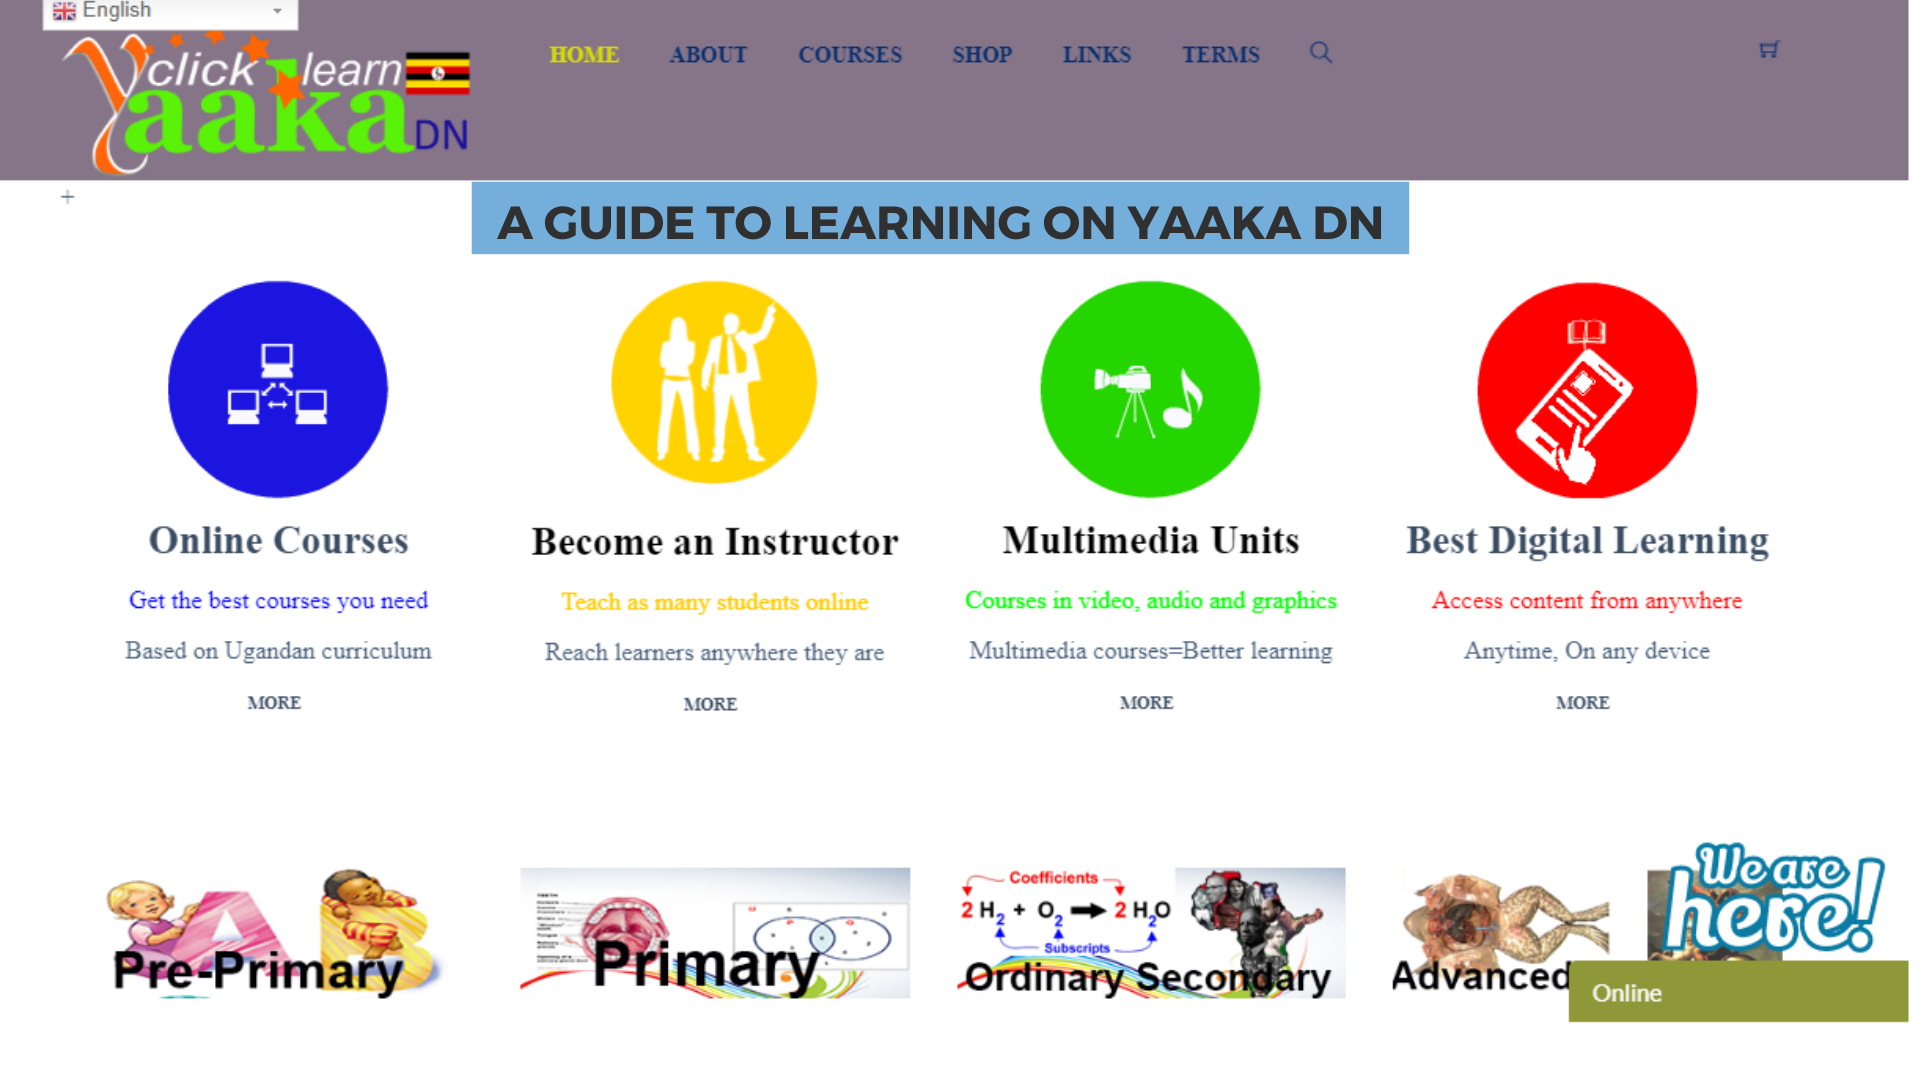 A Guide To Learning on Yaaka DN